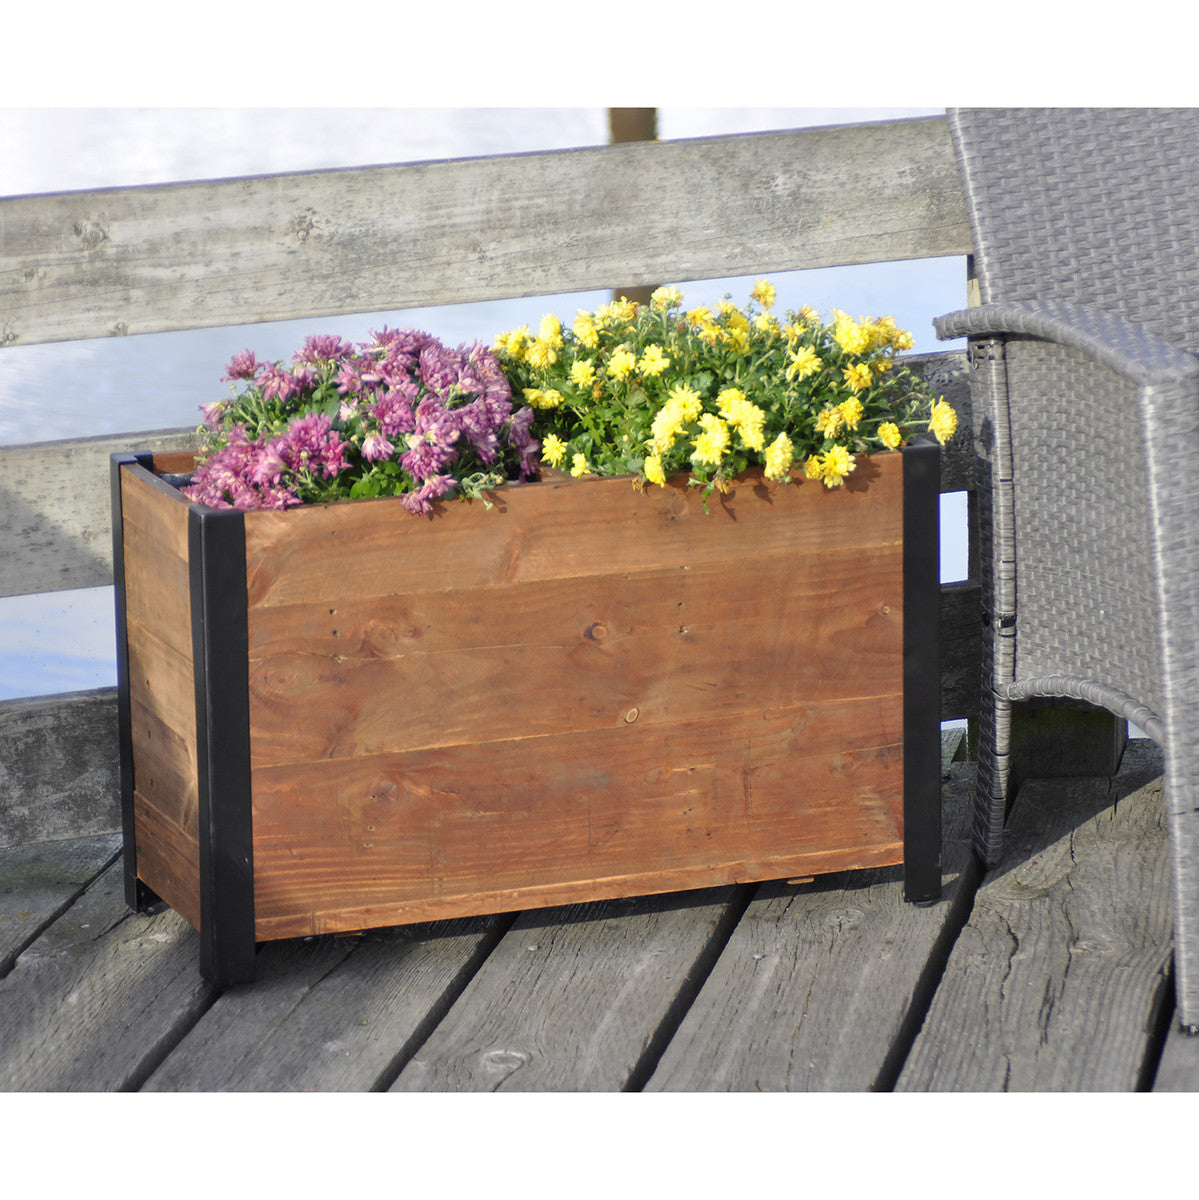 Urban Garden Planter, Recycled Wood and Metal, 2 Sections